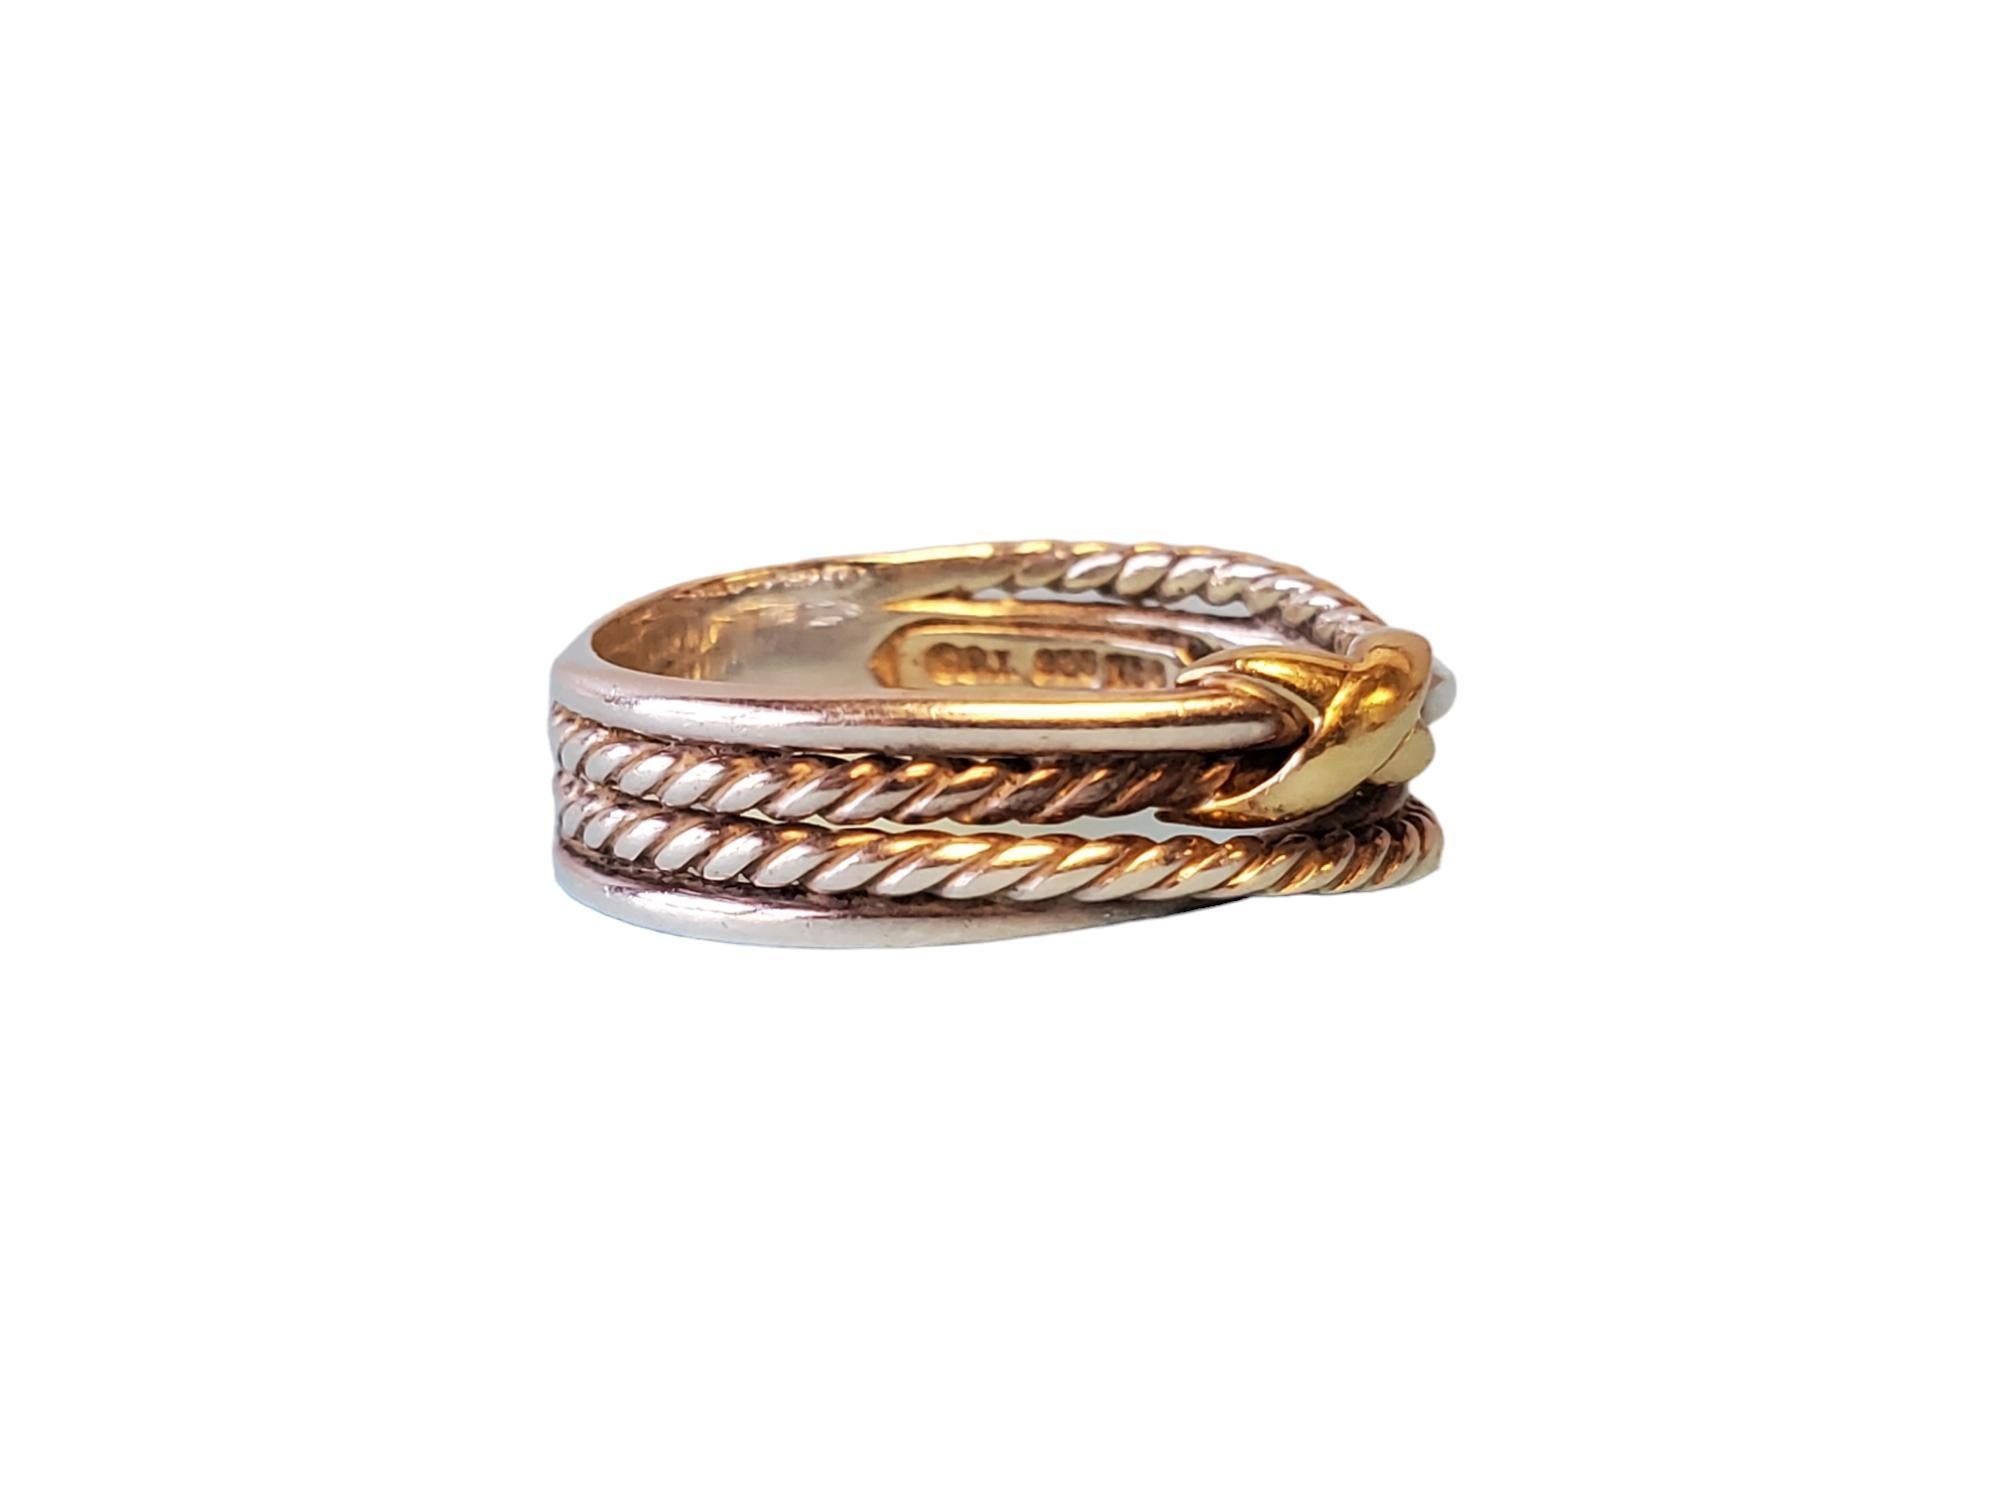 David Yurman signed Bypass Ring

Listed is this fantastic David Yurman sterling silver and 18k yellow gold designer bypass ring. The band wears beautifully and features a twisted bypass design with 18k yellow gold bow accent. This wonderful ring